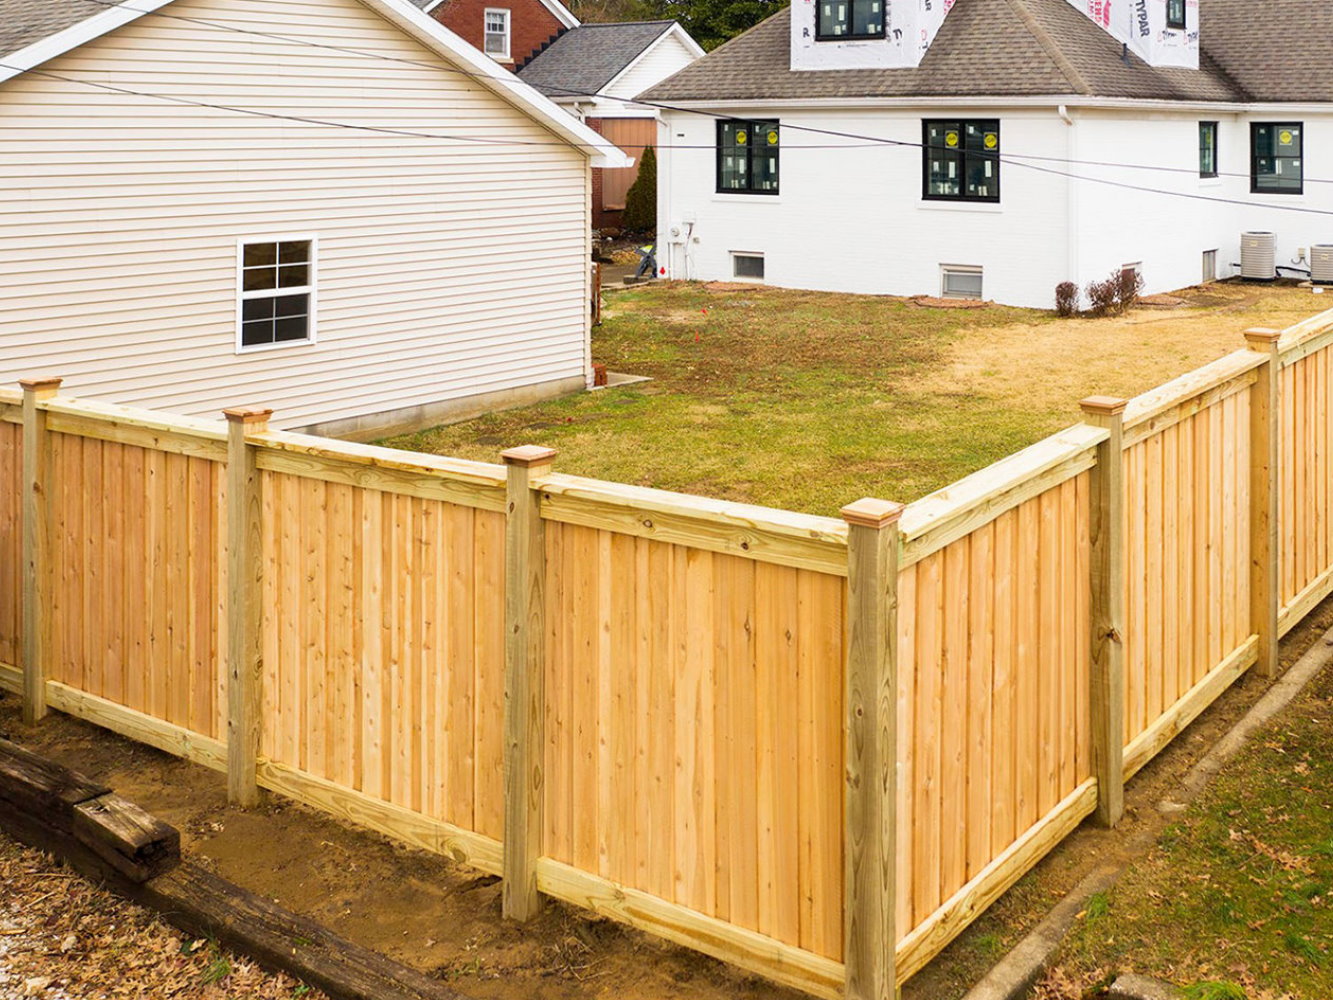 Uniontown KY cap and trim style wood fence